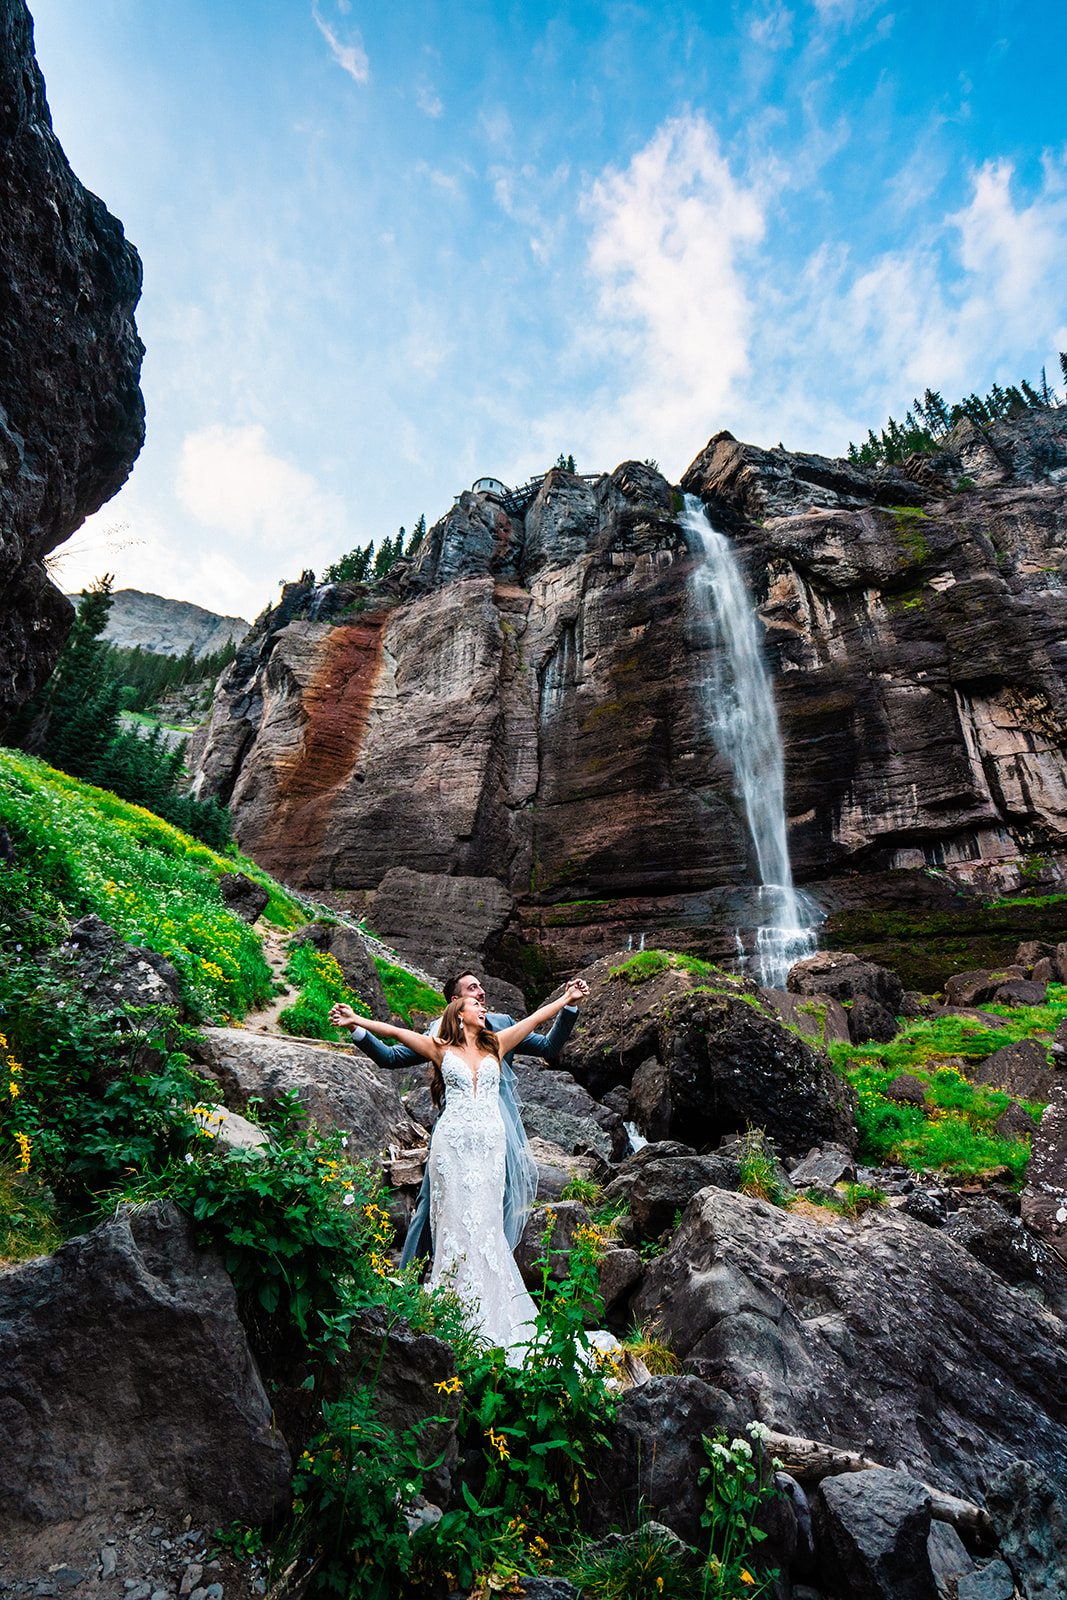 Adventure Bridal Veil Falls elopement day with dreamy backdrops and mountain views in Colorado